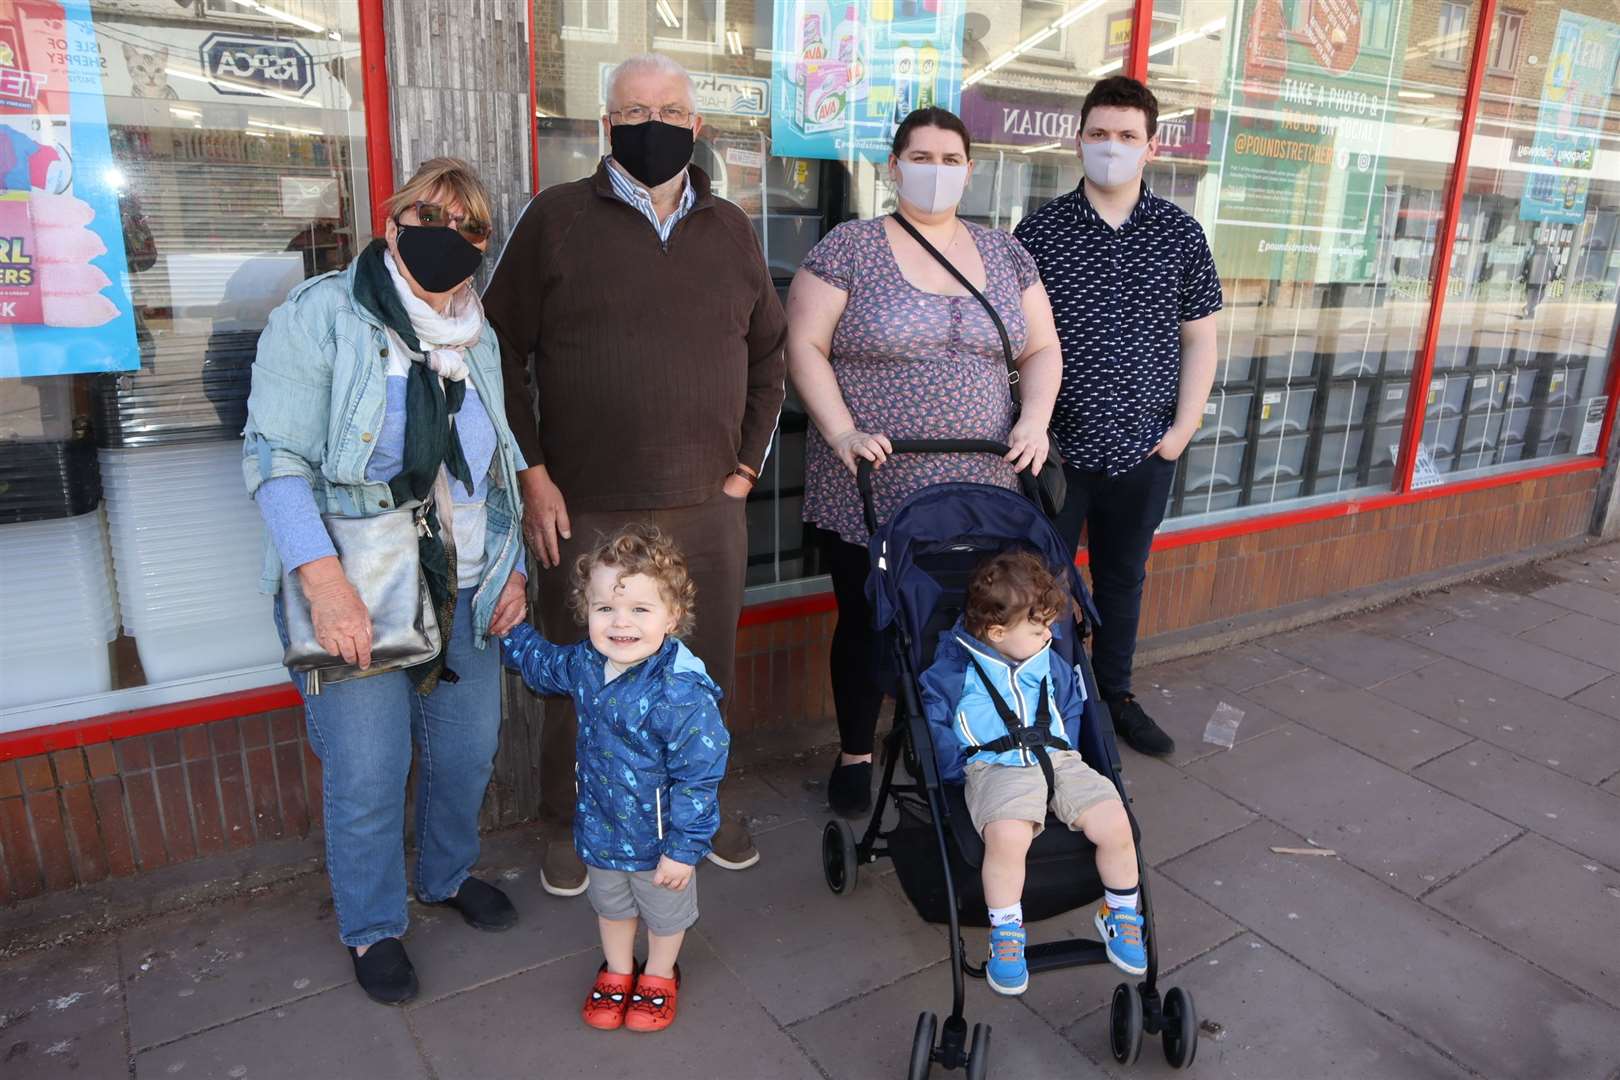 Reunited: Sharon and Eric Ambrose of Hoo managed to meet up with their grandchildren Matthew, two, and Nathan, one, in Sheerness High Street. They are pictured with the children's mum Katie Dollman from Sheerness and her brother Tommy after the easing of Covid-19 lockdown restrictions